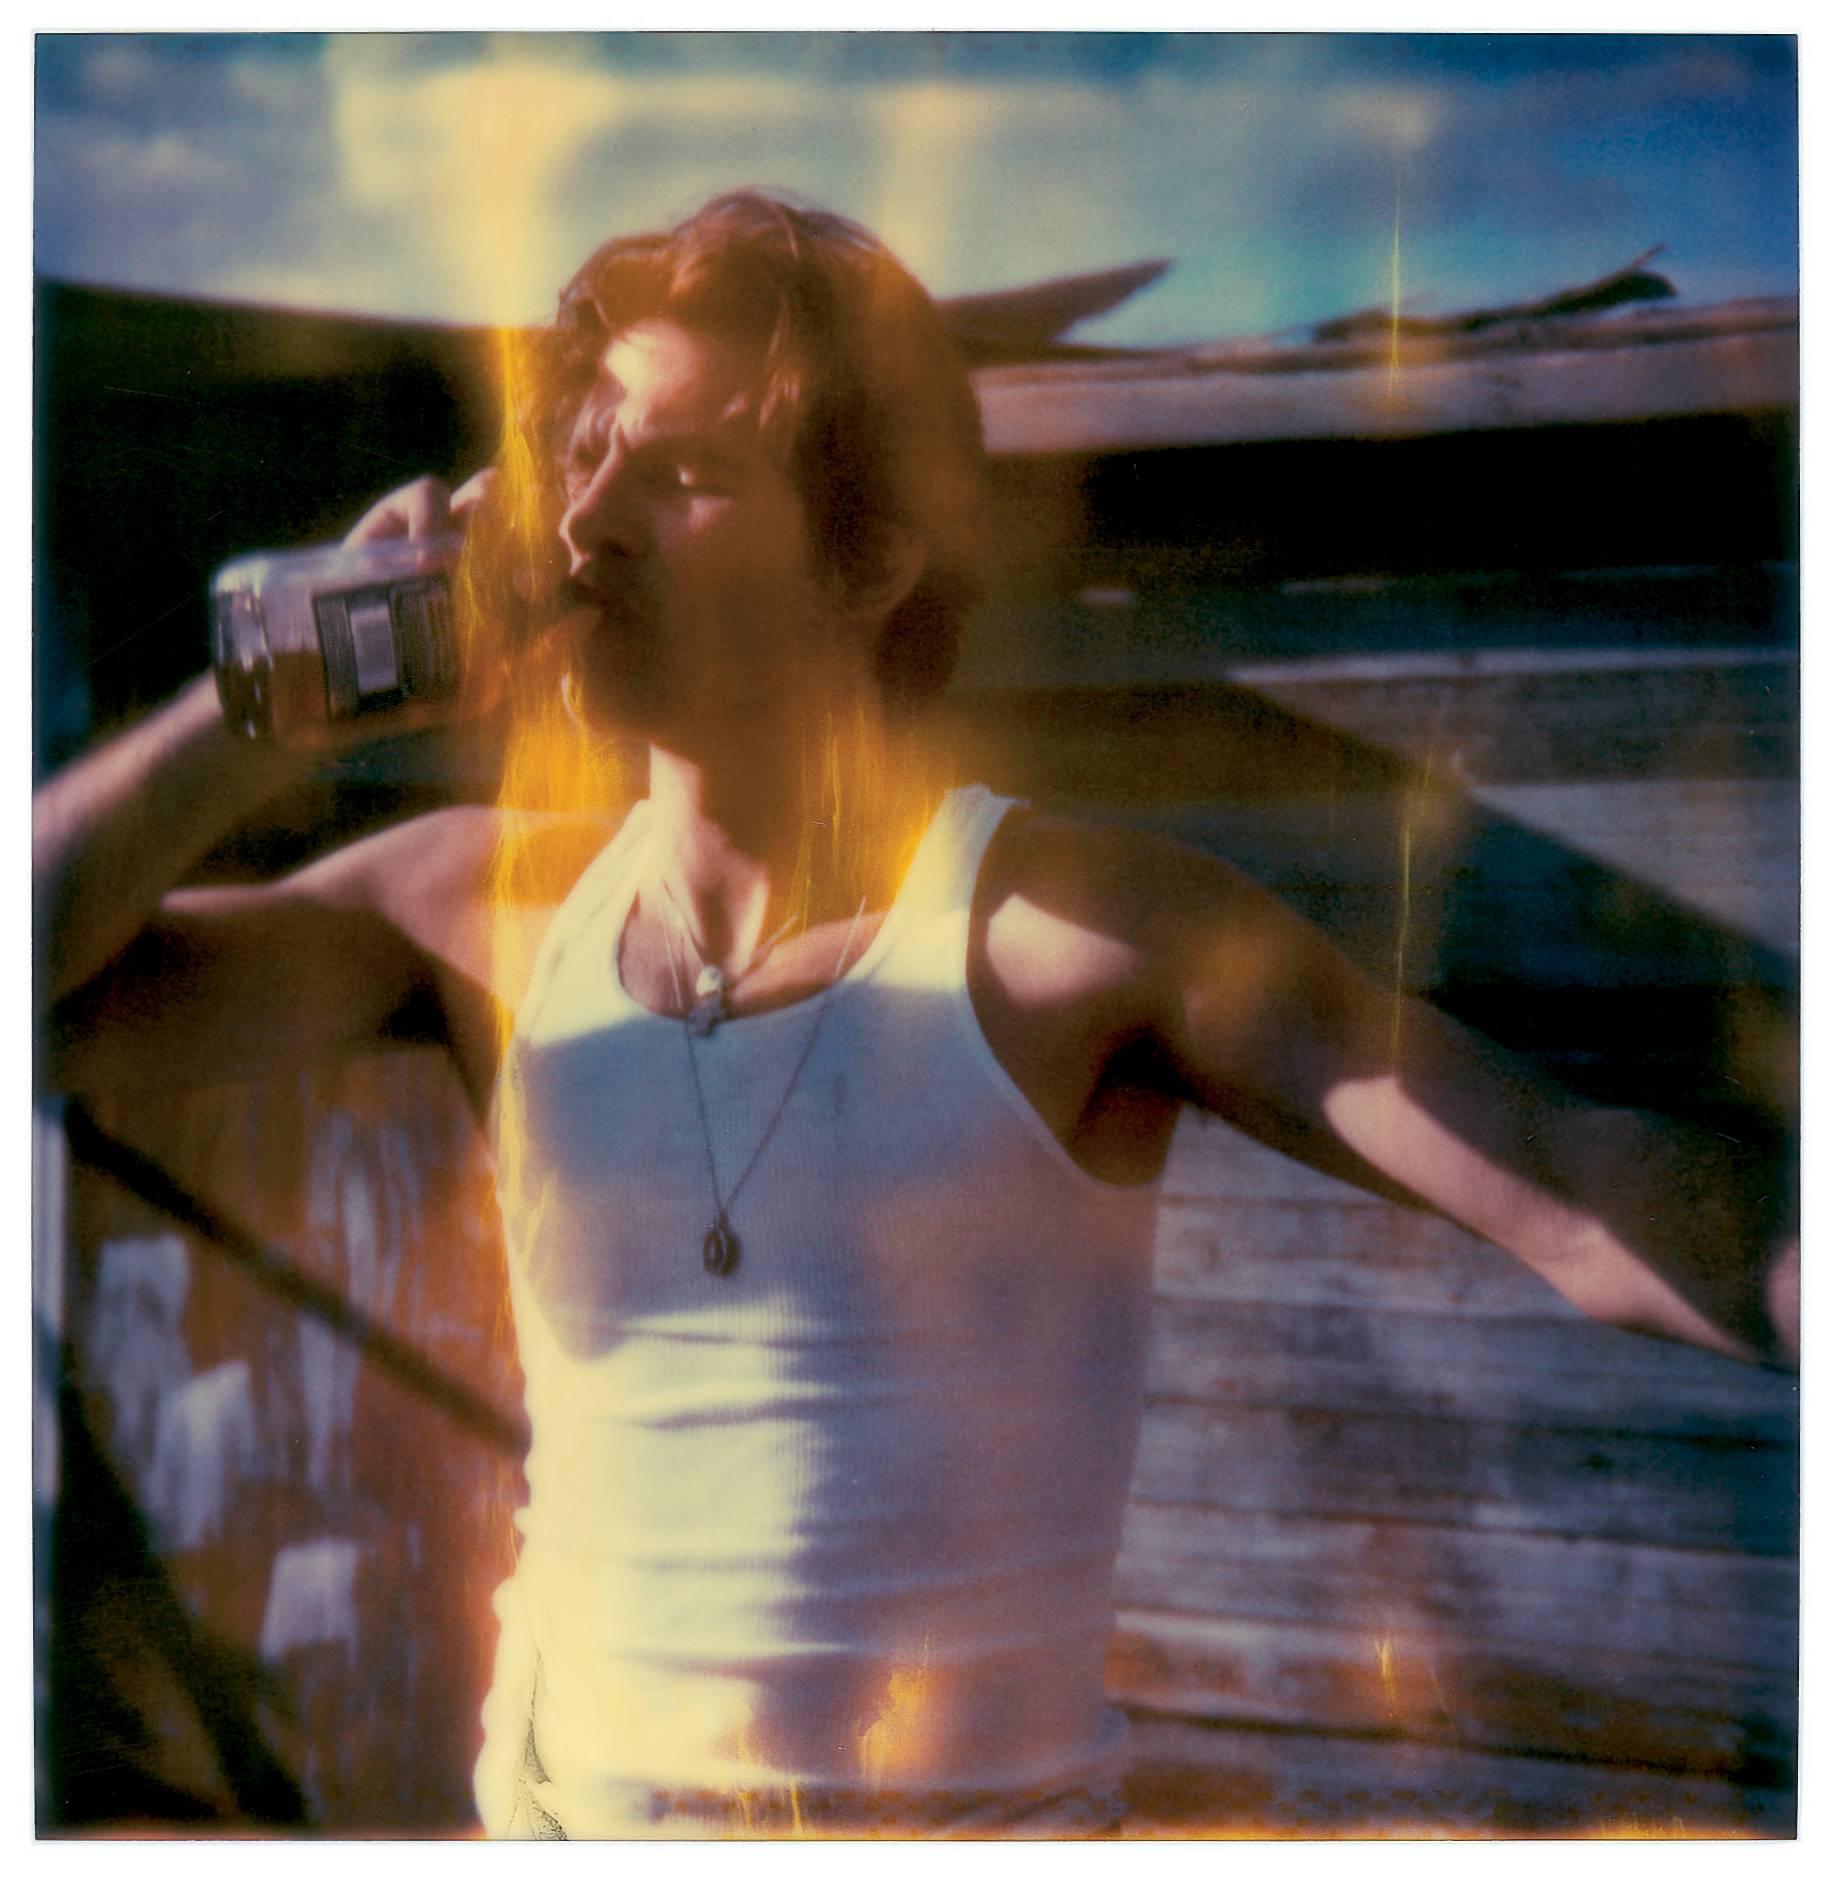 'Whisky Dance I' (Sidewinder), 2005, 8 pieces installed including gaps 172x338cm, 82x80cm, Edition 1/5, 
analog C-Prints, hand-printed by the artist on Fuji Crystal Archive Paper, mounted on Aluminum with matte UV-Protection, based on 8 Polaroids,